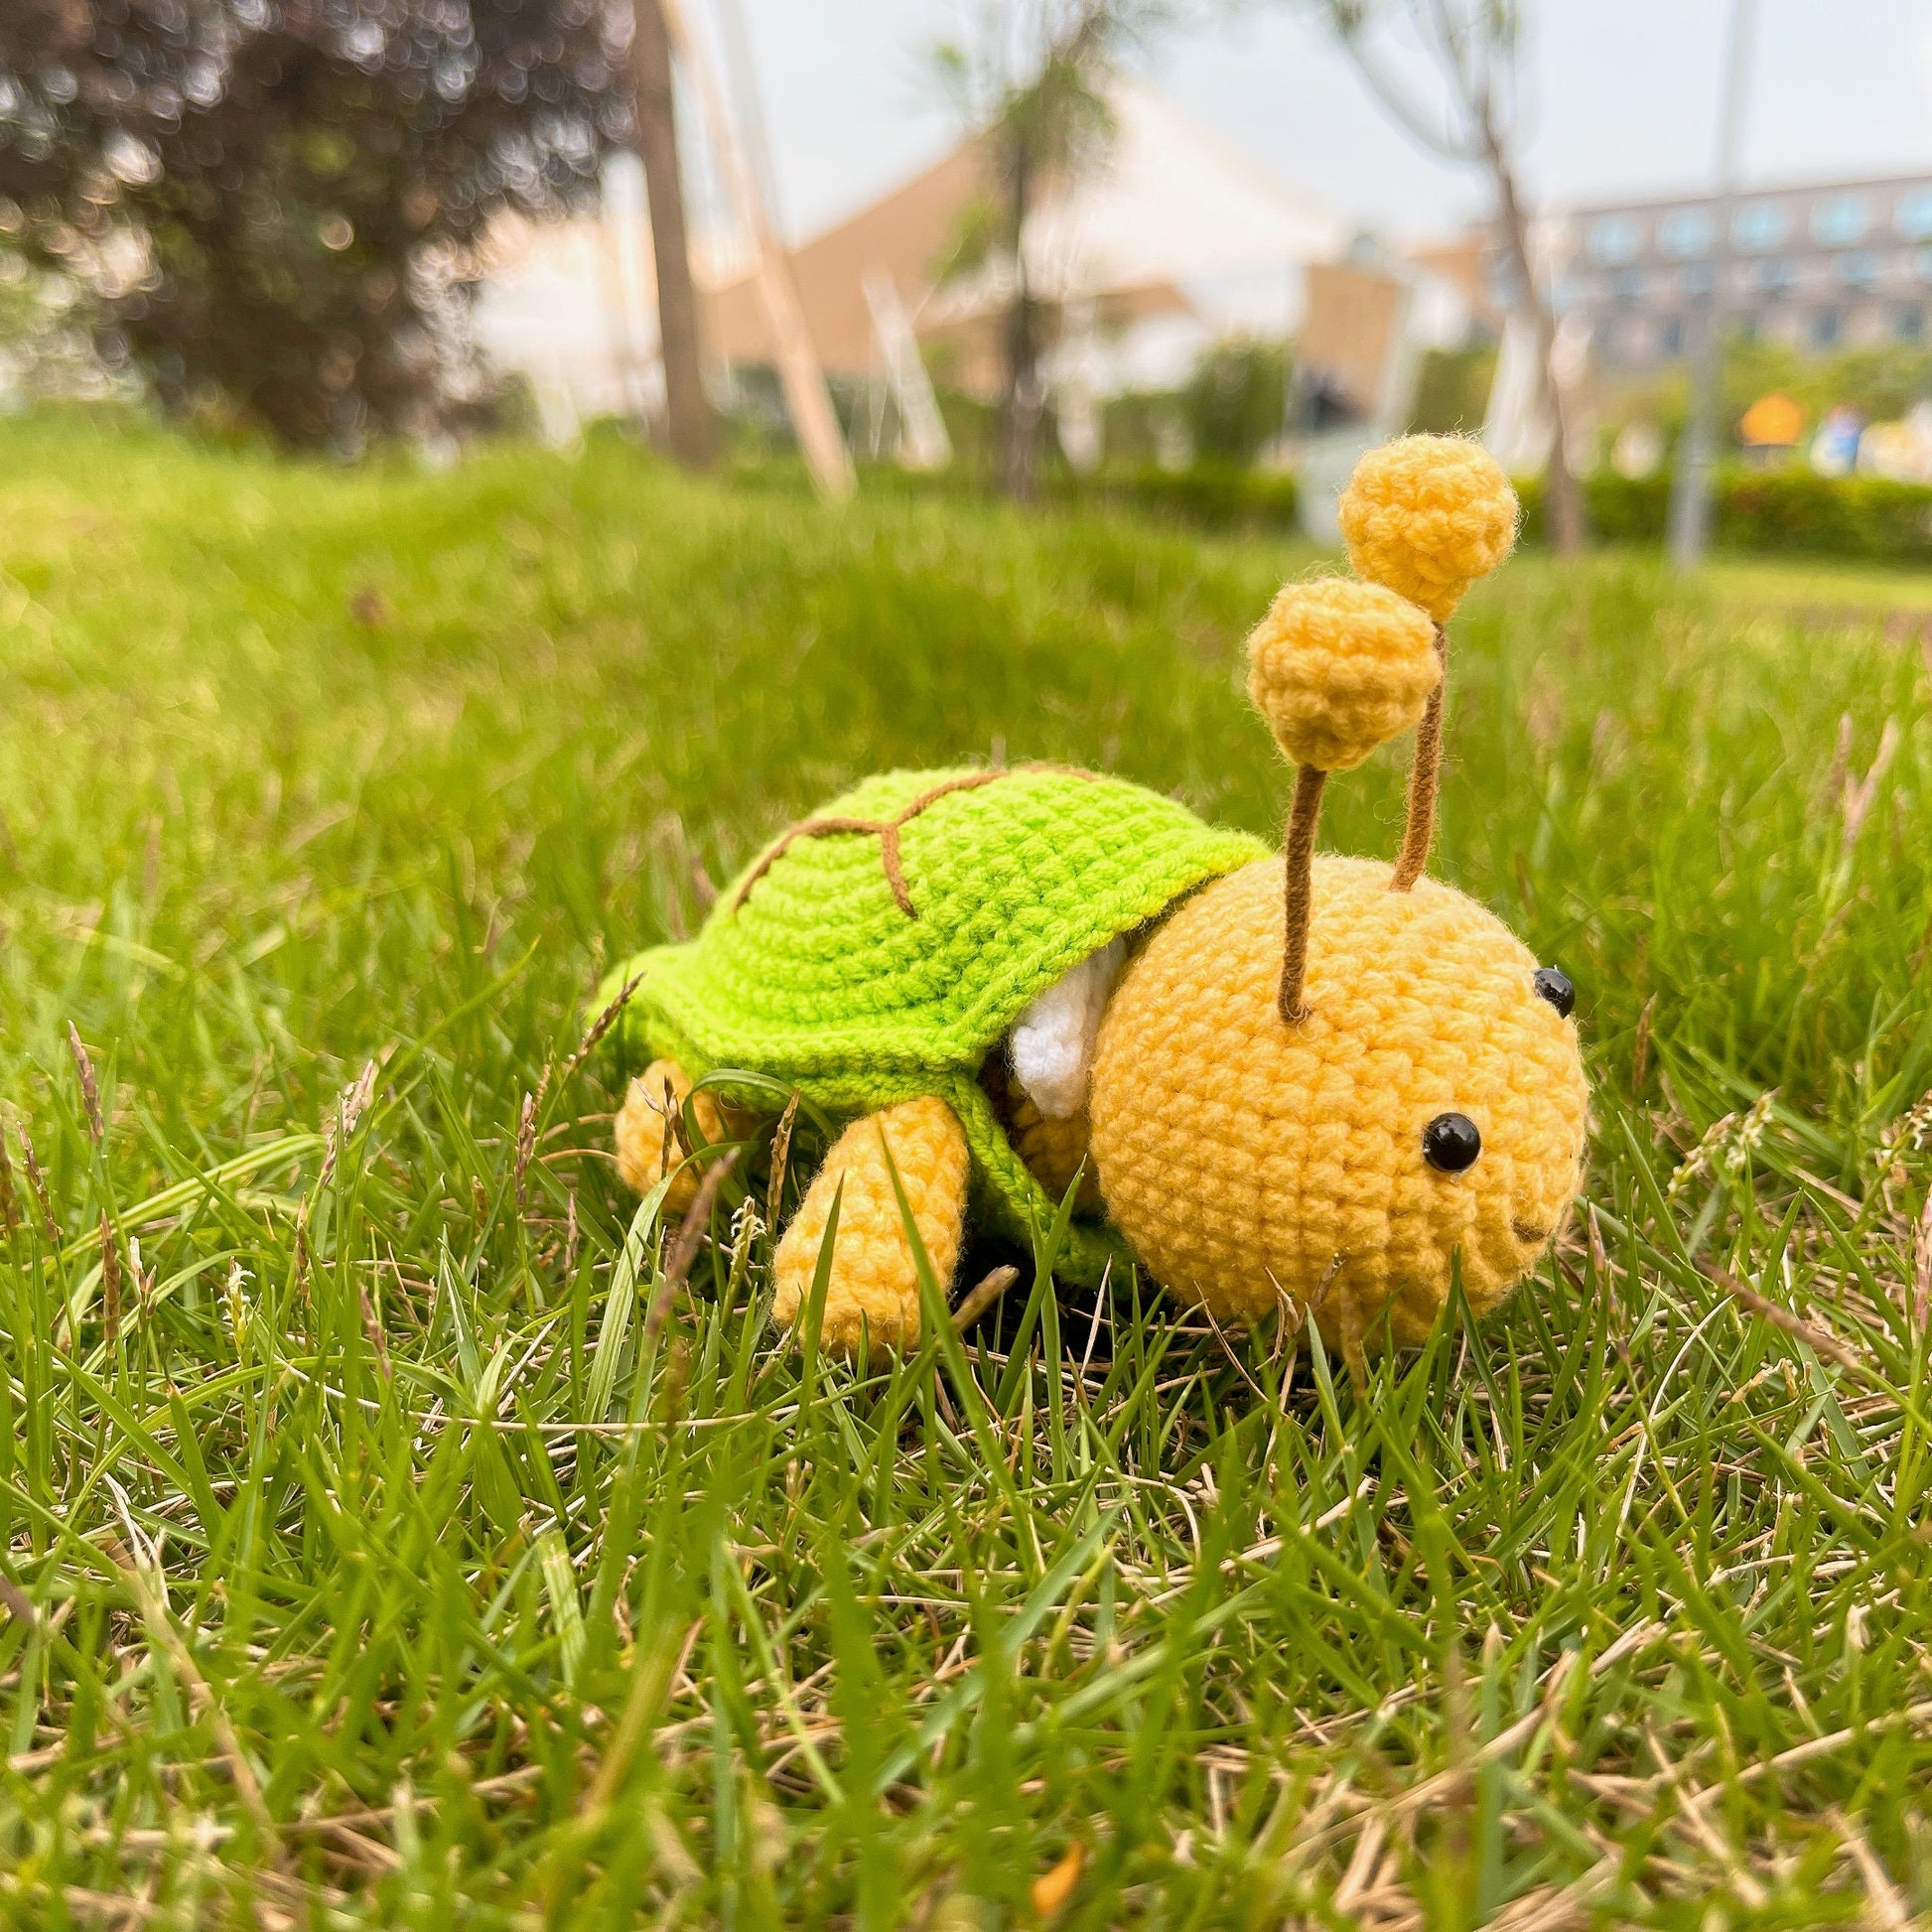 Buzzy the Turtle - Crochet Amigurumi Bee in Shell Plushie, Whimsical Gift, Collectible, Creative Toy, Handmade Toys, Inspirational Gifts